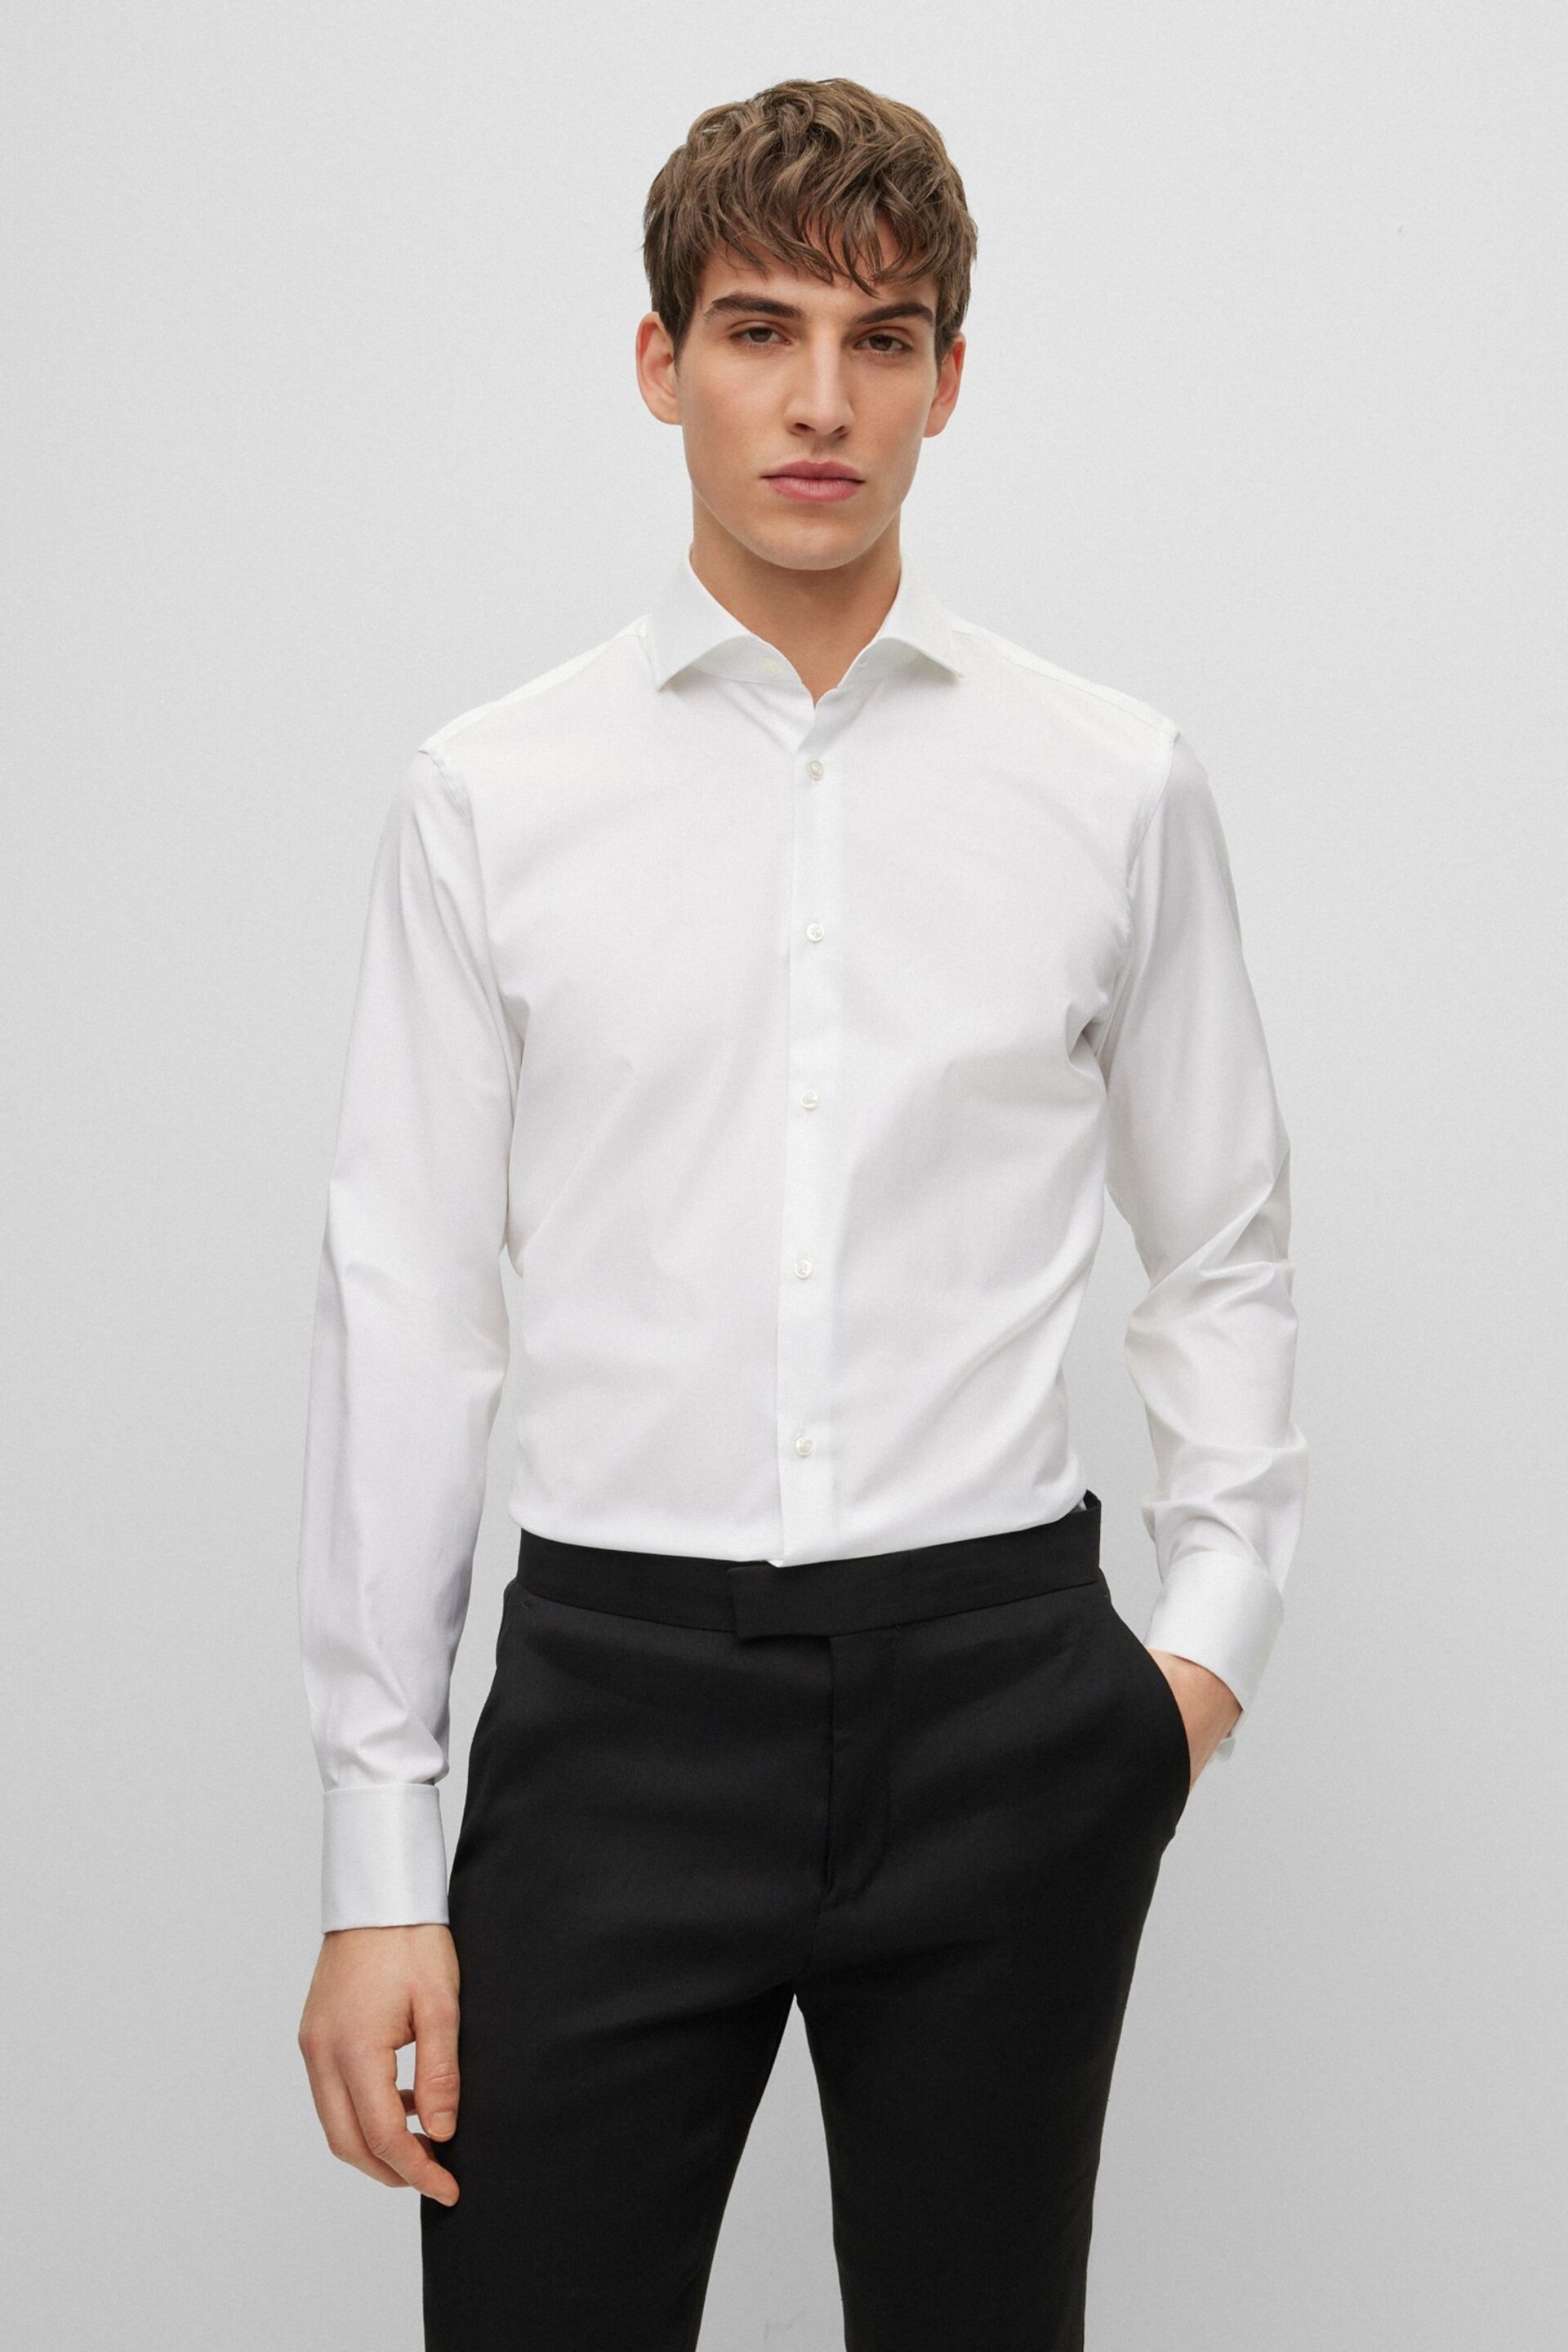 BOSS White Regular Fit Double Cuff Long Sleeve Shirt - Image 1 of 6